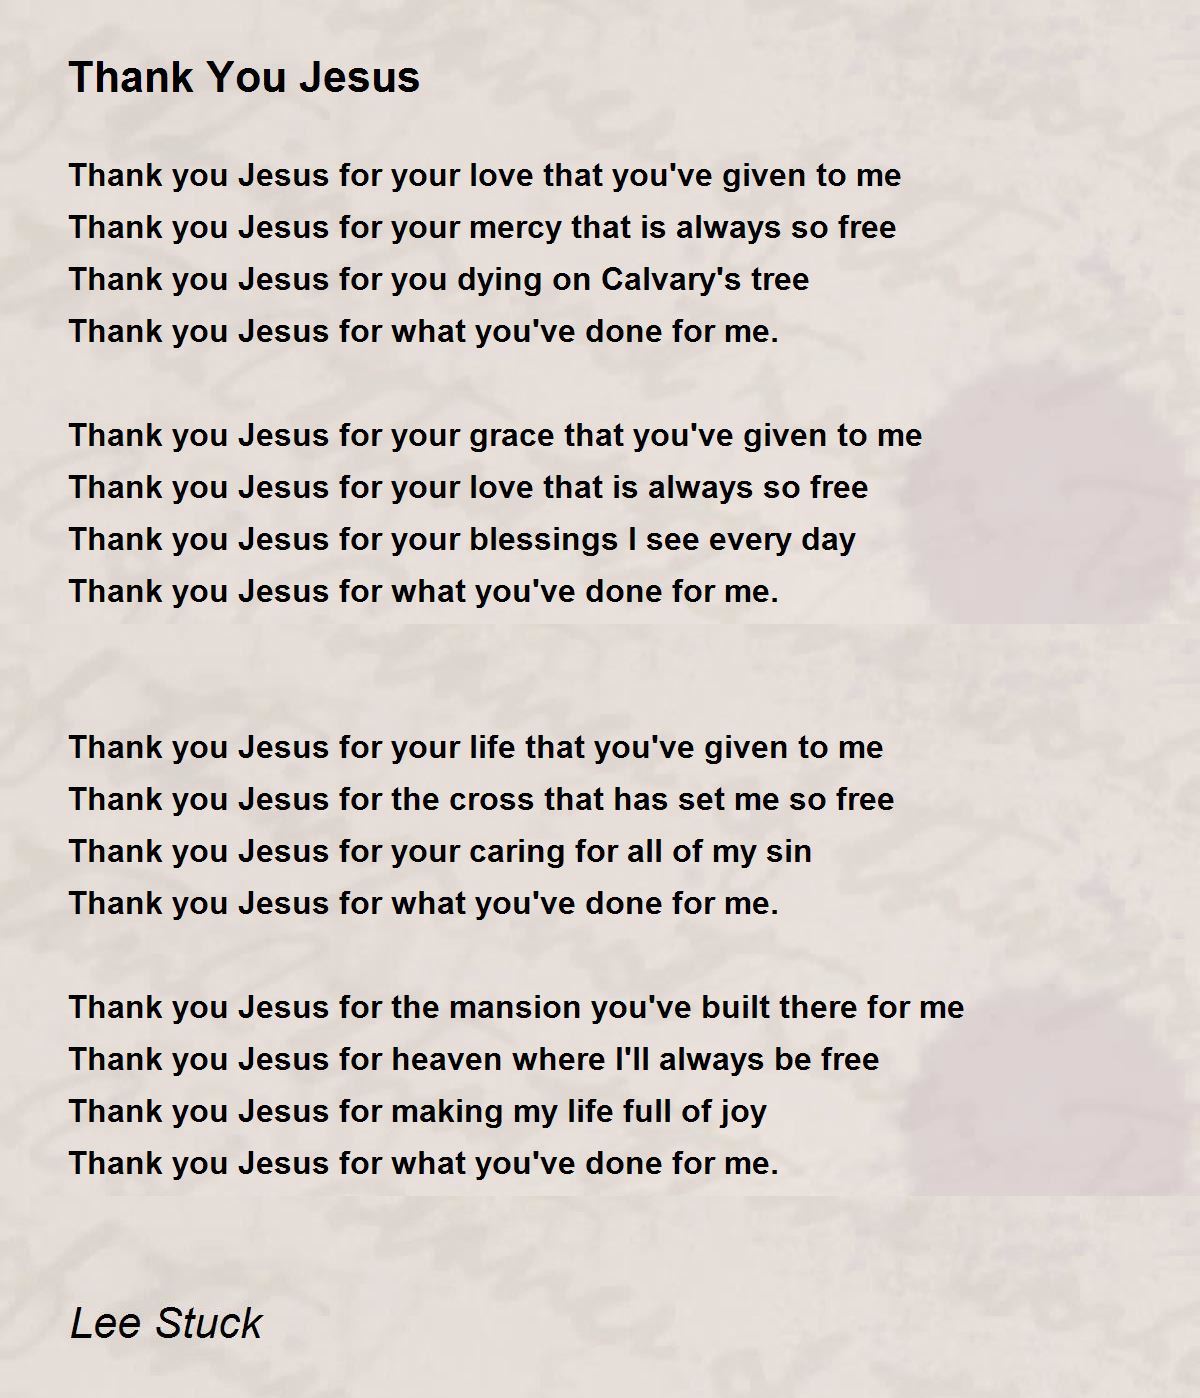 Thank You Jesus - Thank You Jesus Poem by Lee Stuck